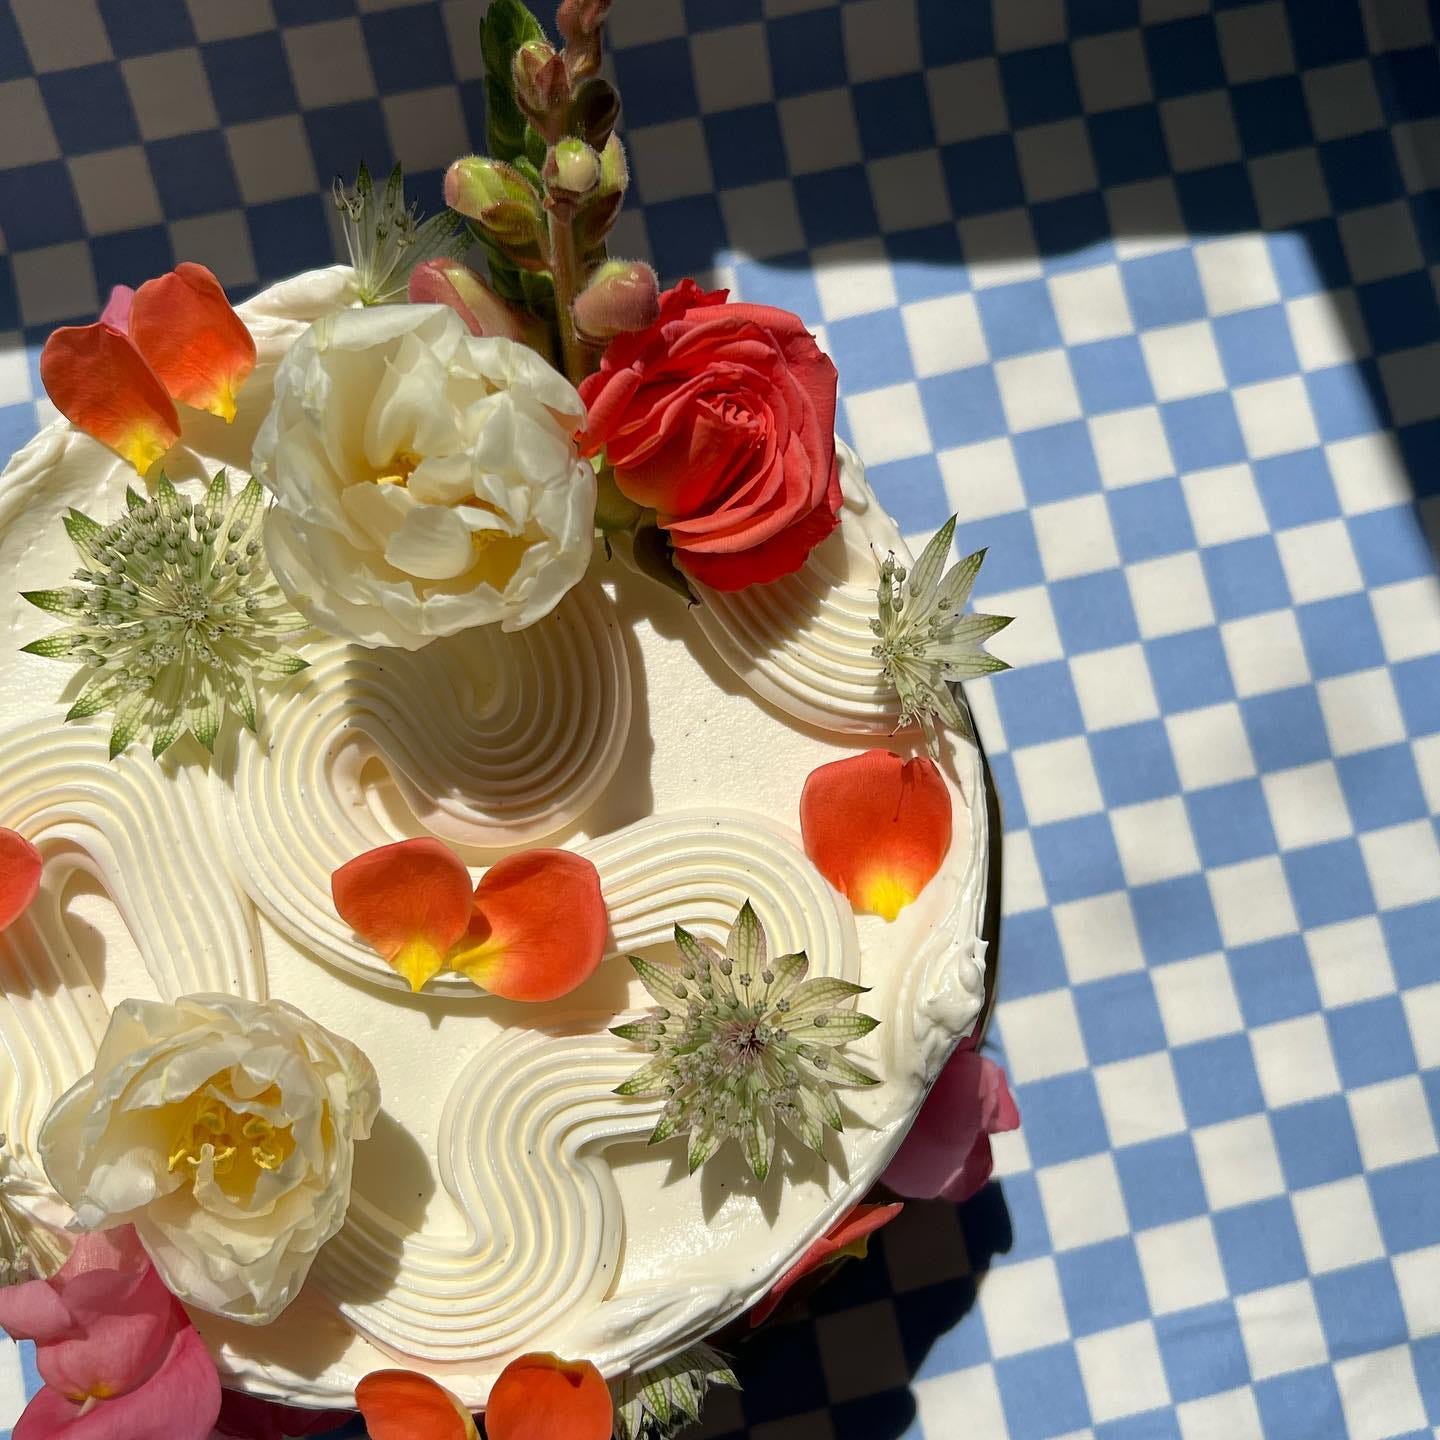 cream-colored cake with flower petals on a blue checkerboard background